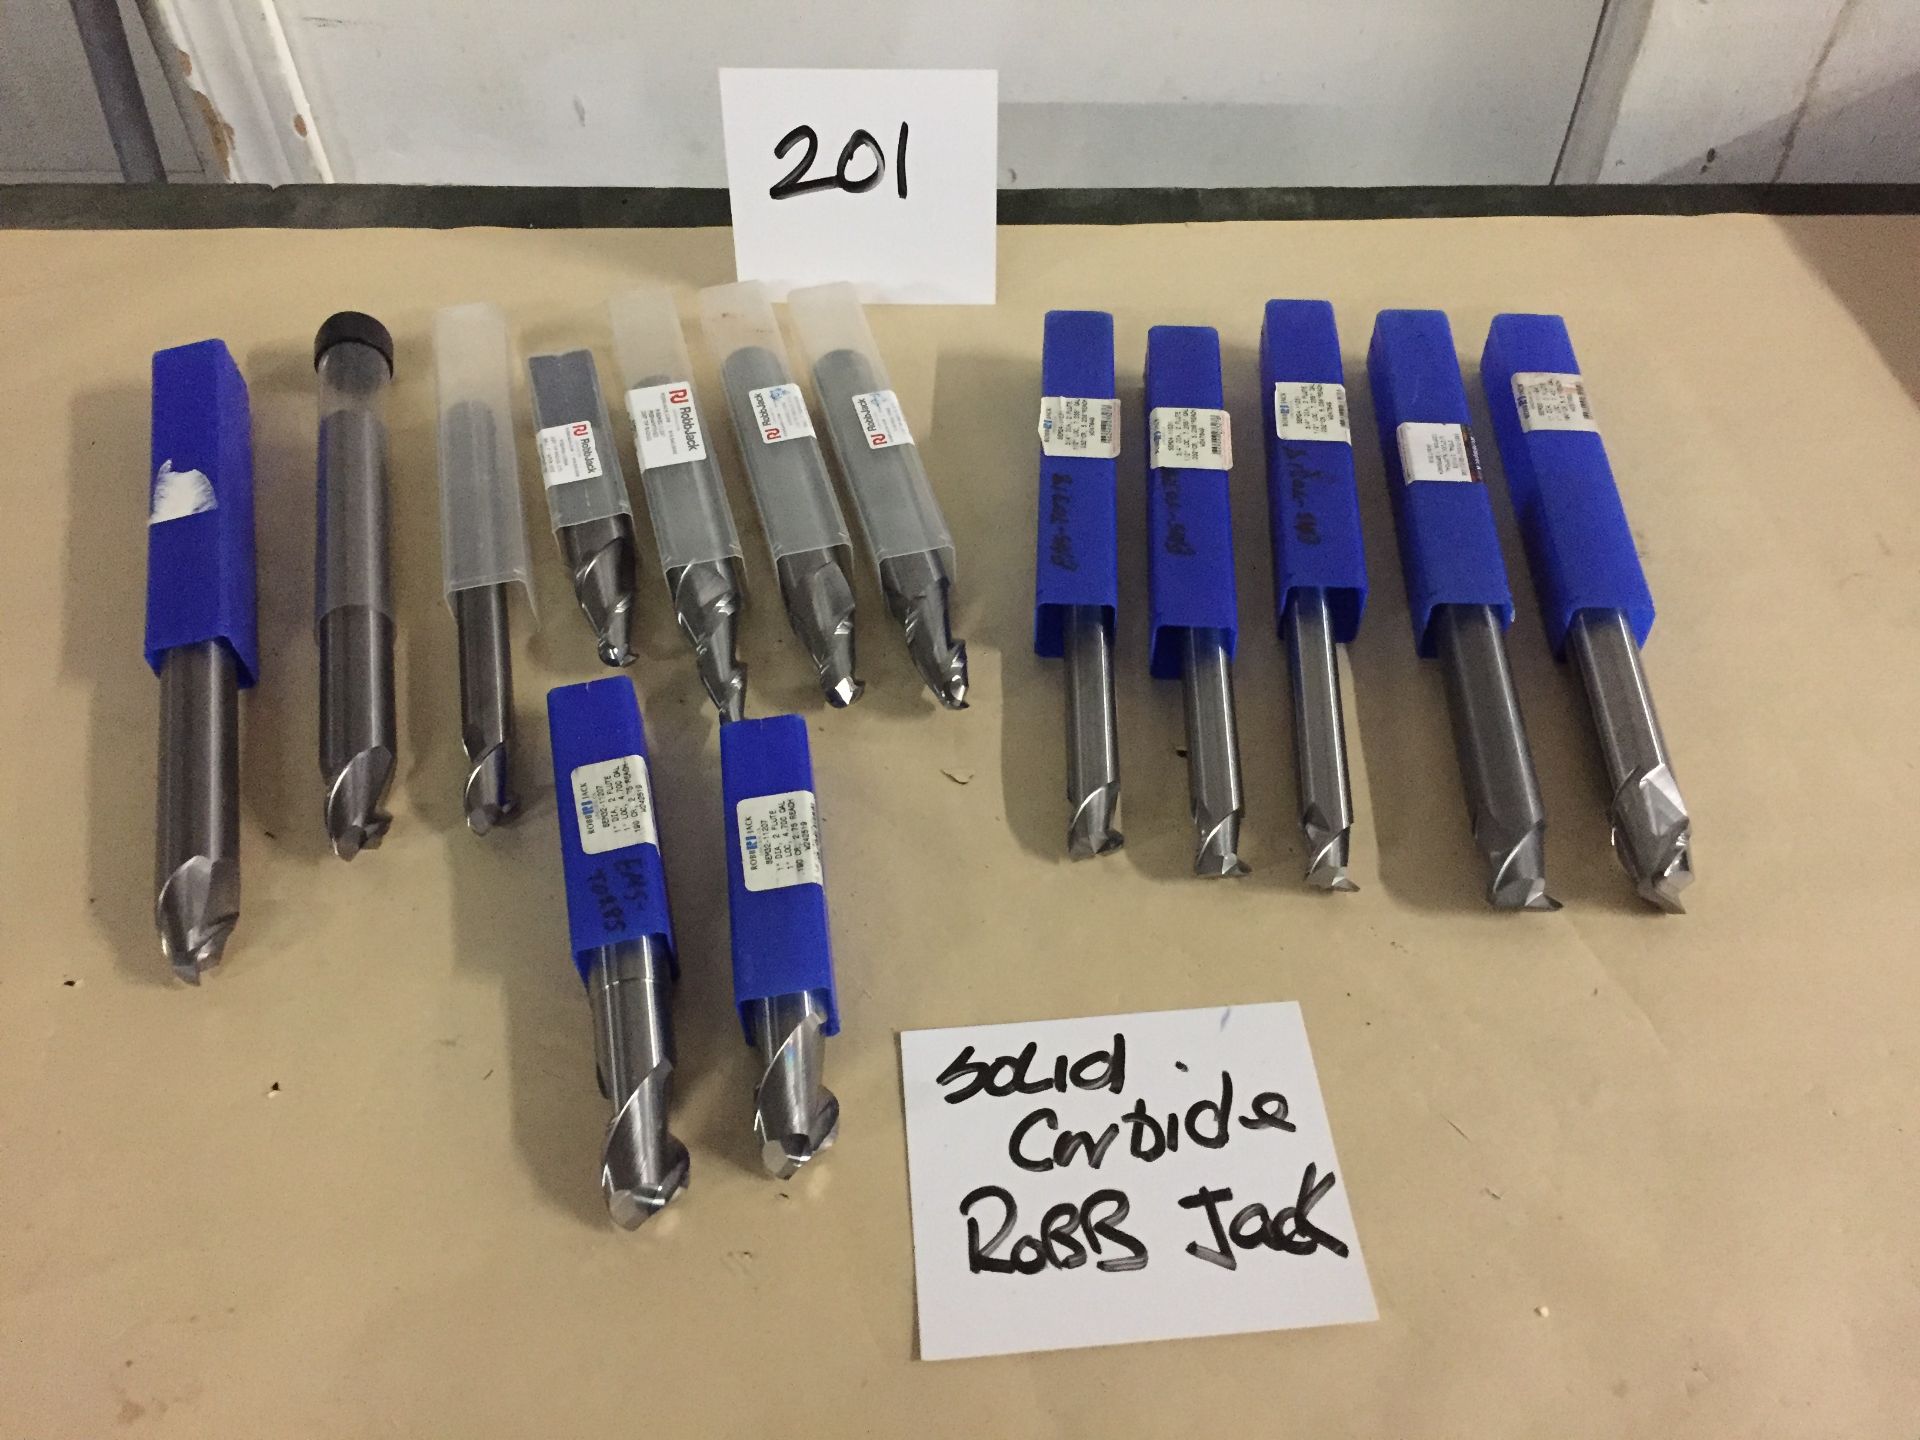 Assortment of Robb Jack Solid Carbide End Mills & Profile Mills